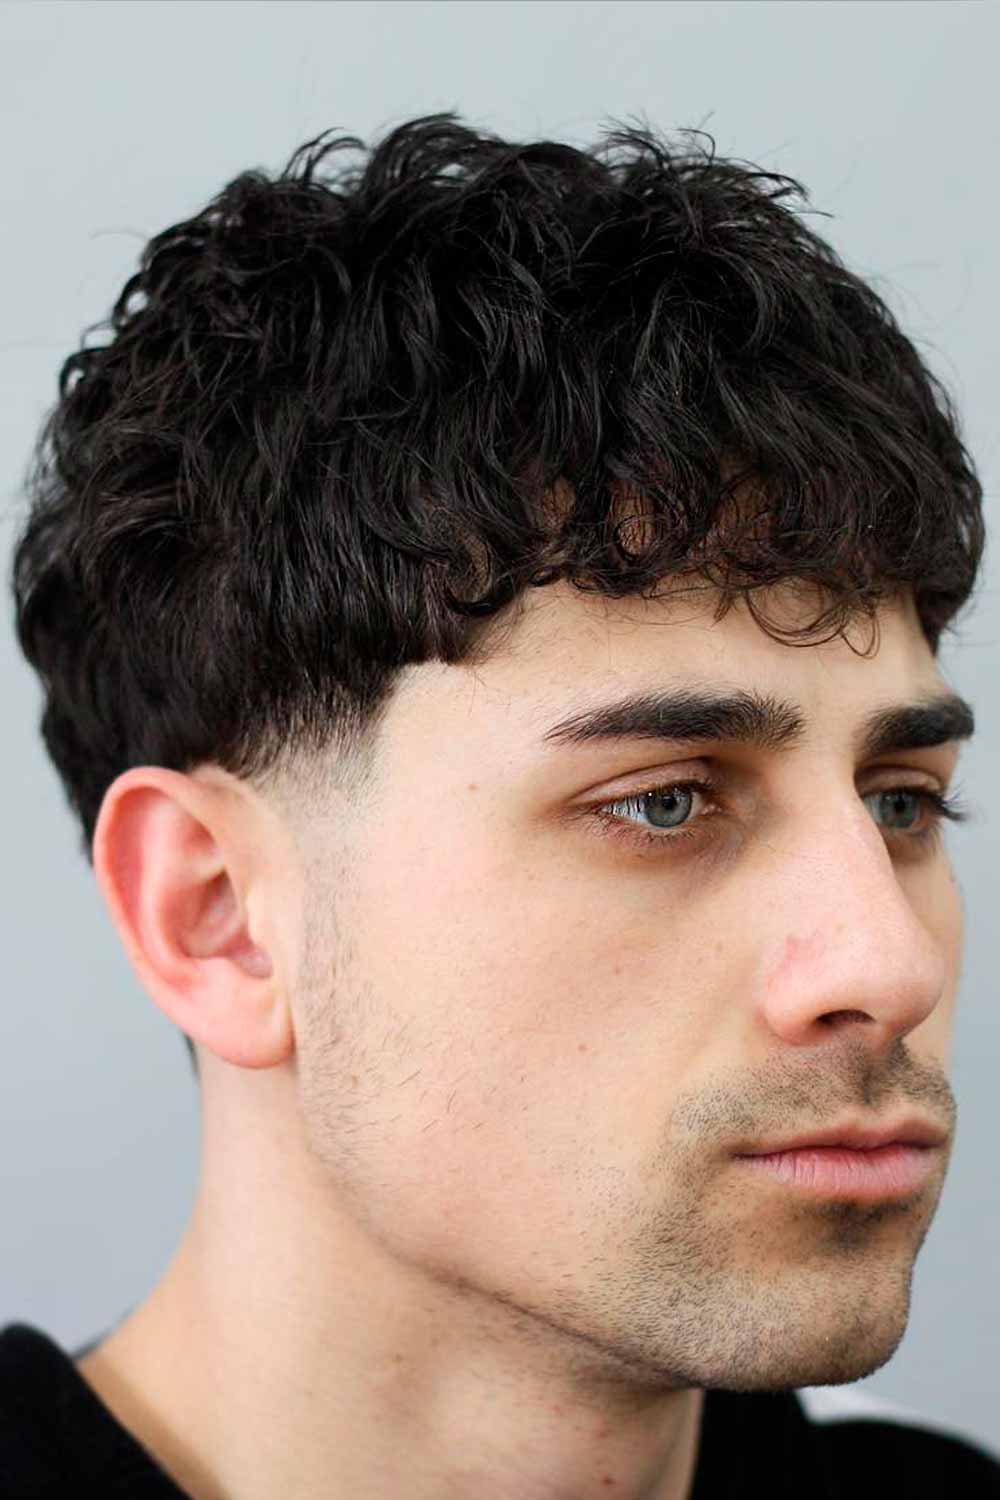 105 of the Best Curly Hairstyles for Men (Haircut Ideas)